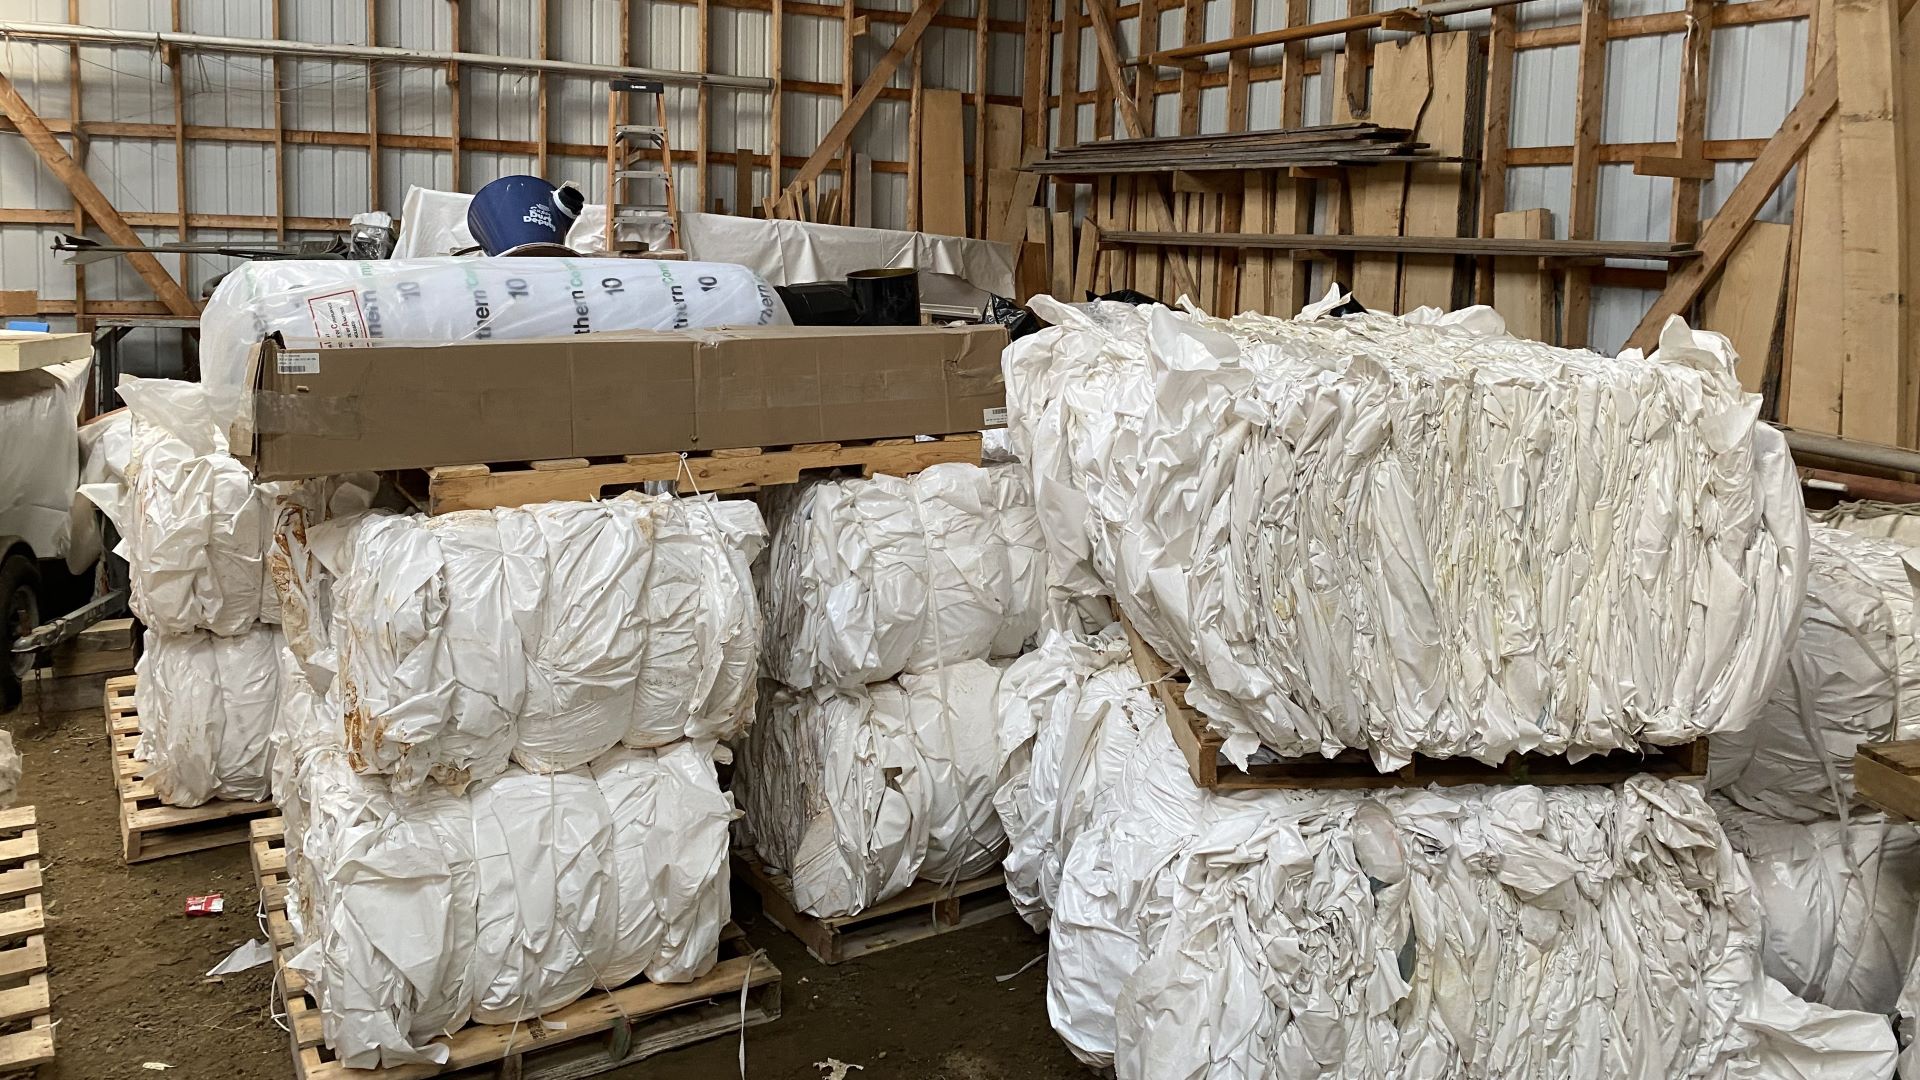 Bales of plastic boat covers in a warehouse.